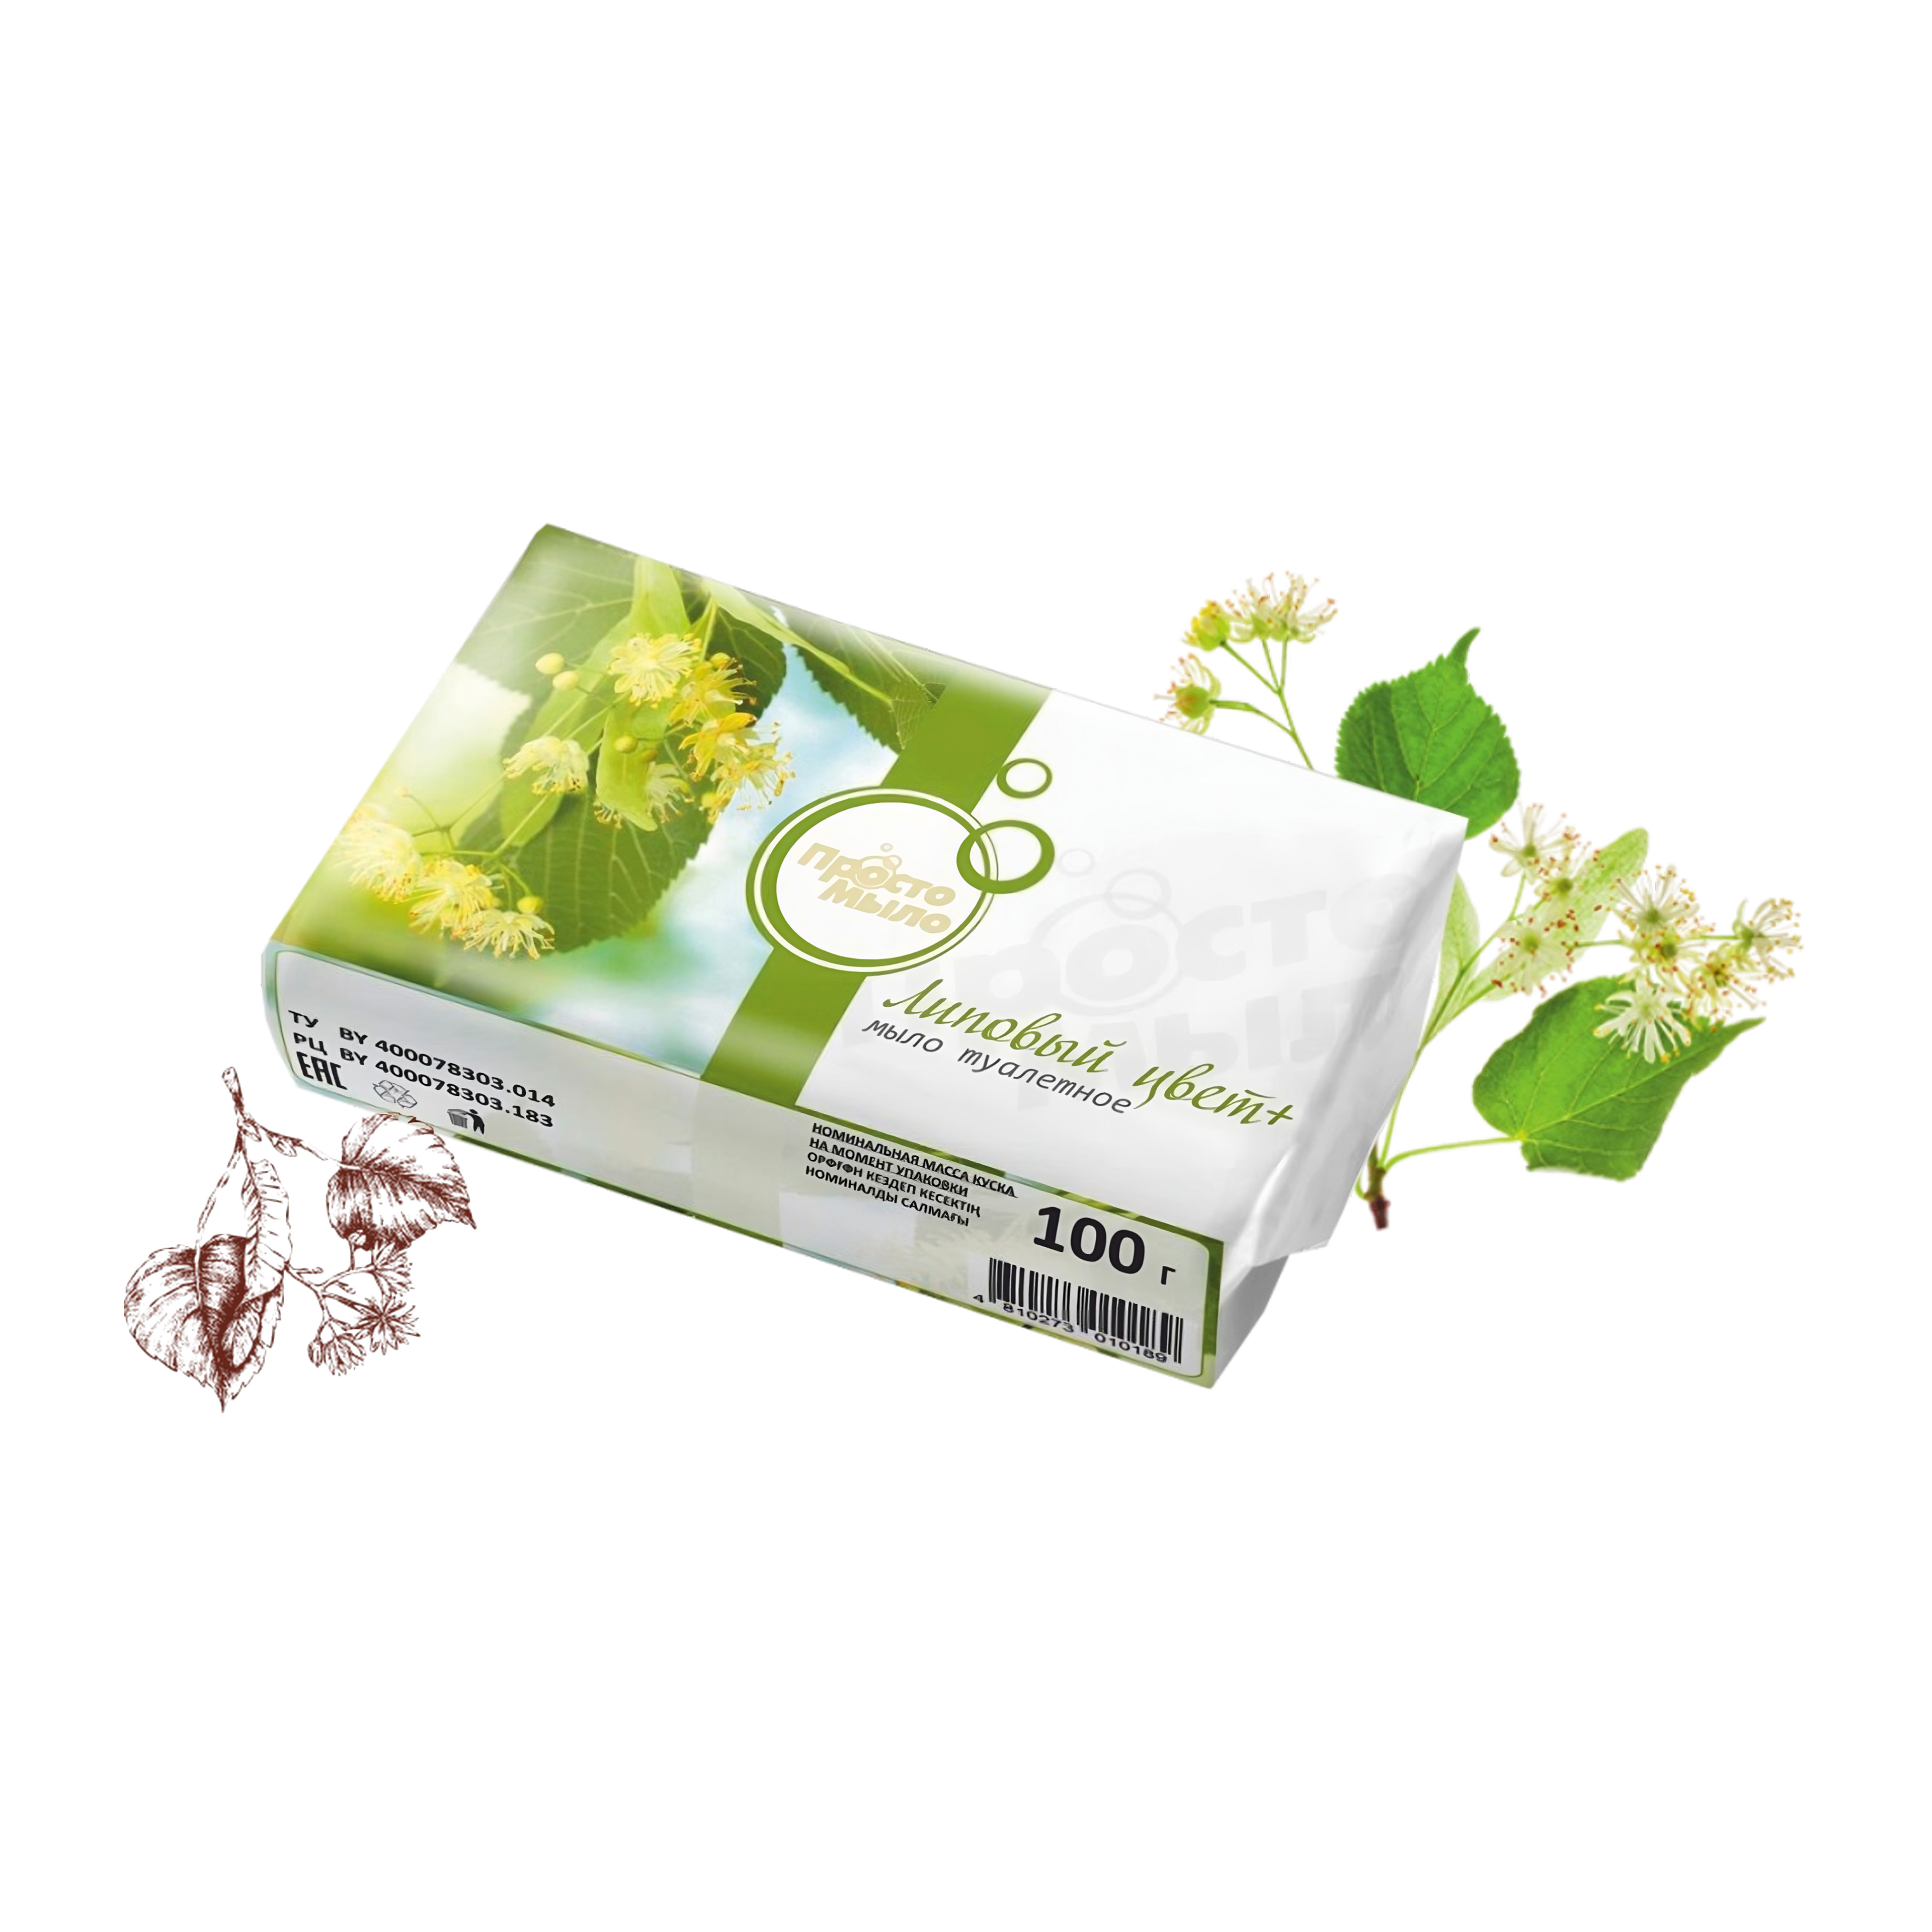 Just a toilet soap Linden blossom + in bulk